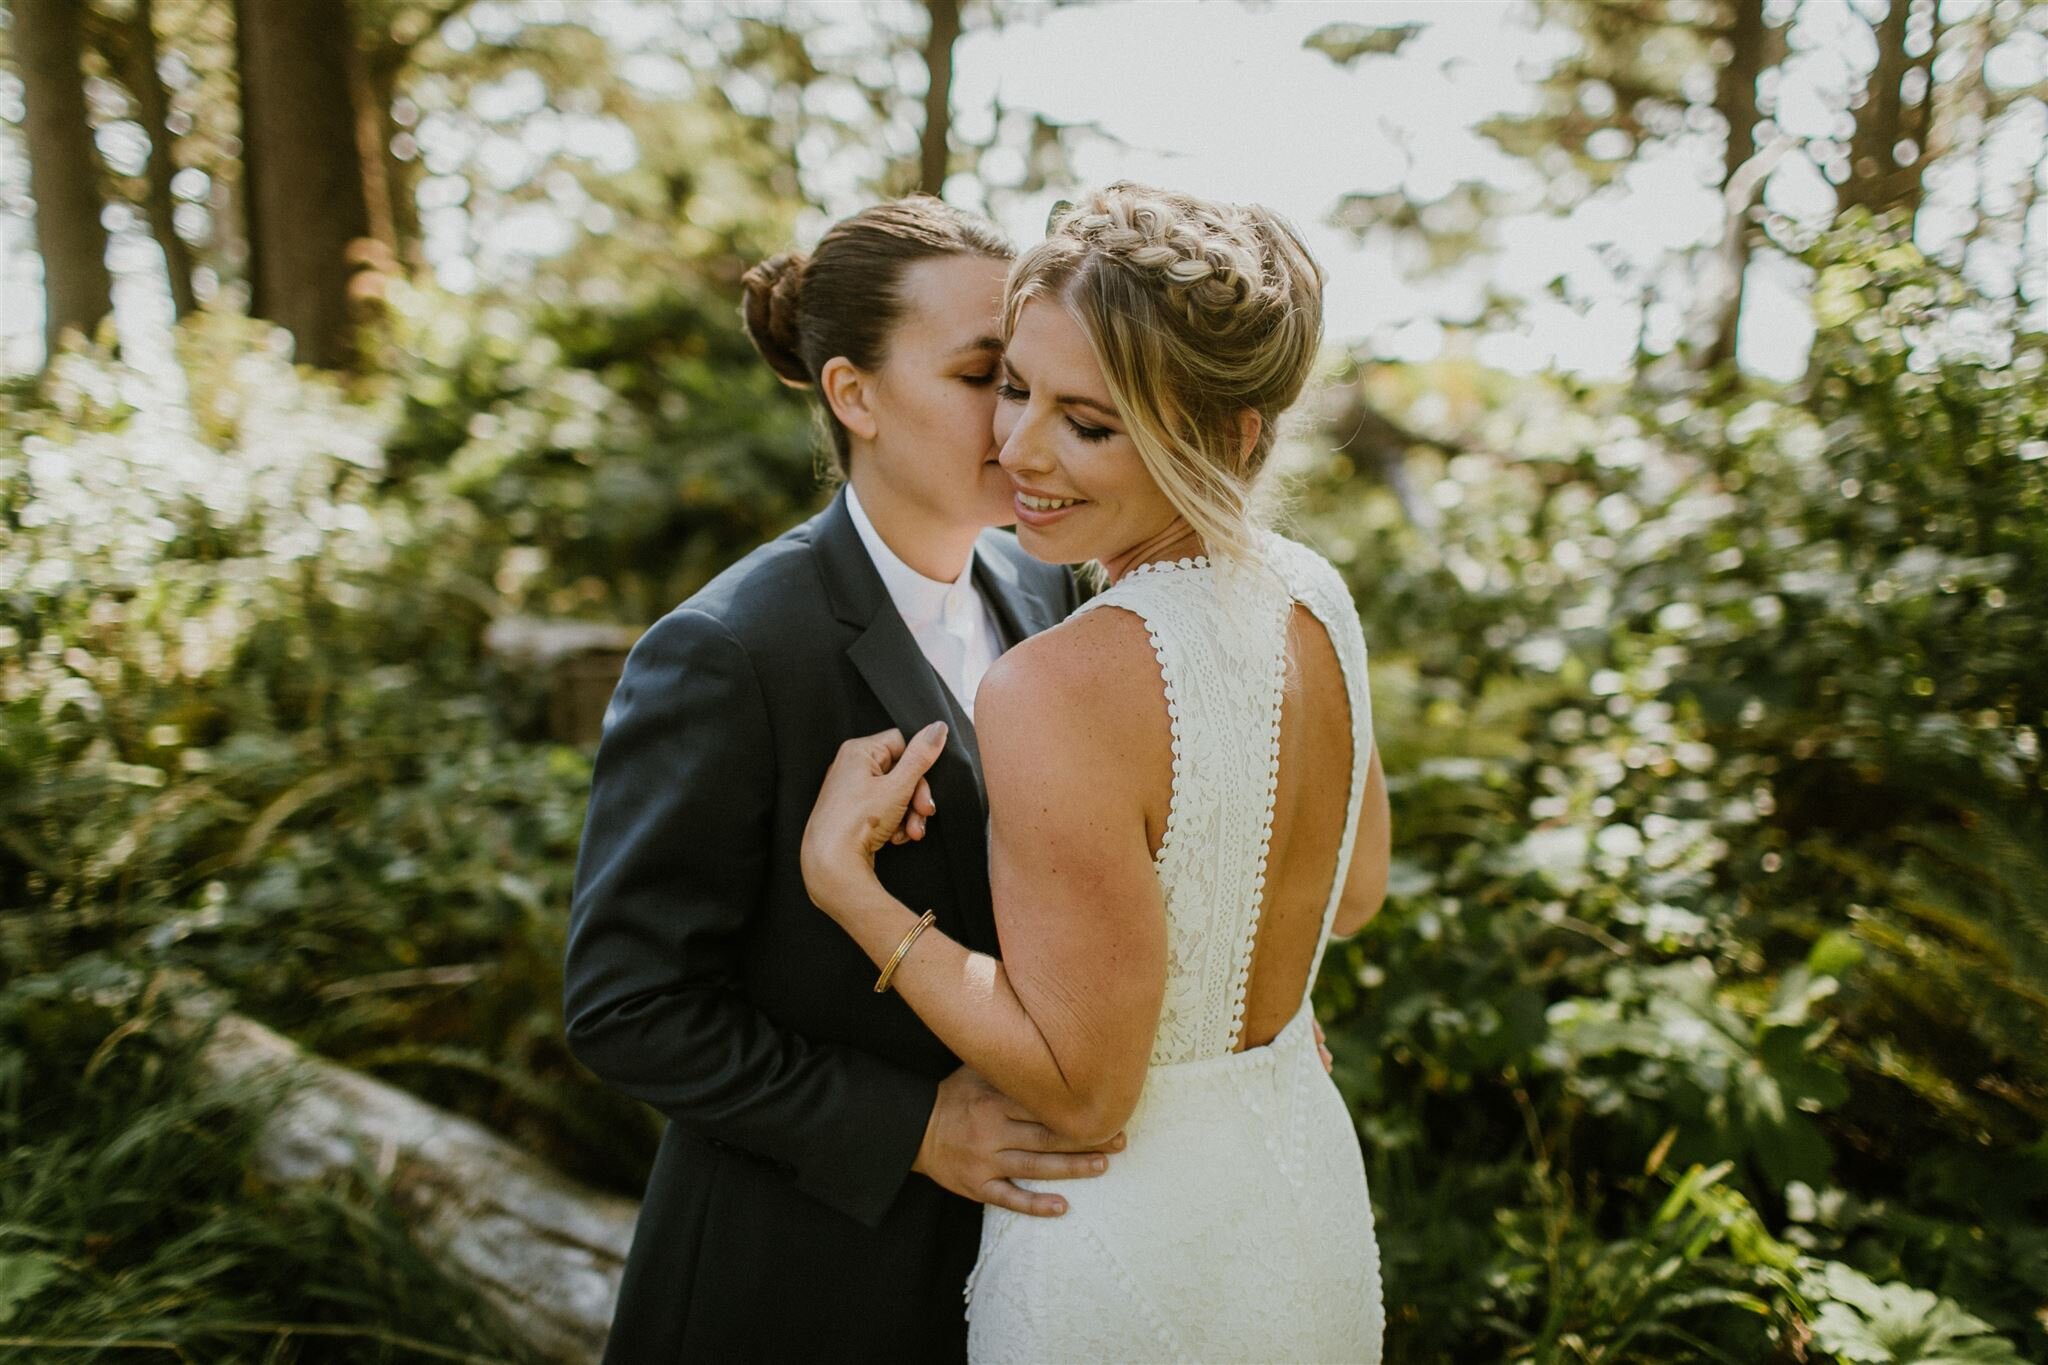  Real wedding on the Oregon coast with Amy and Danielle in the Rish Rio wedding dress by Catalina Jean Photography 